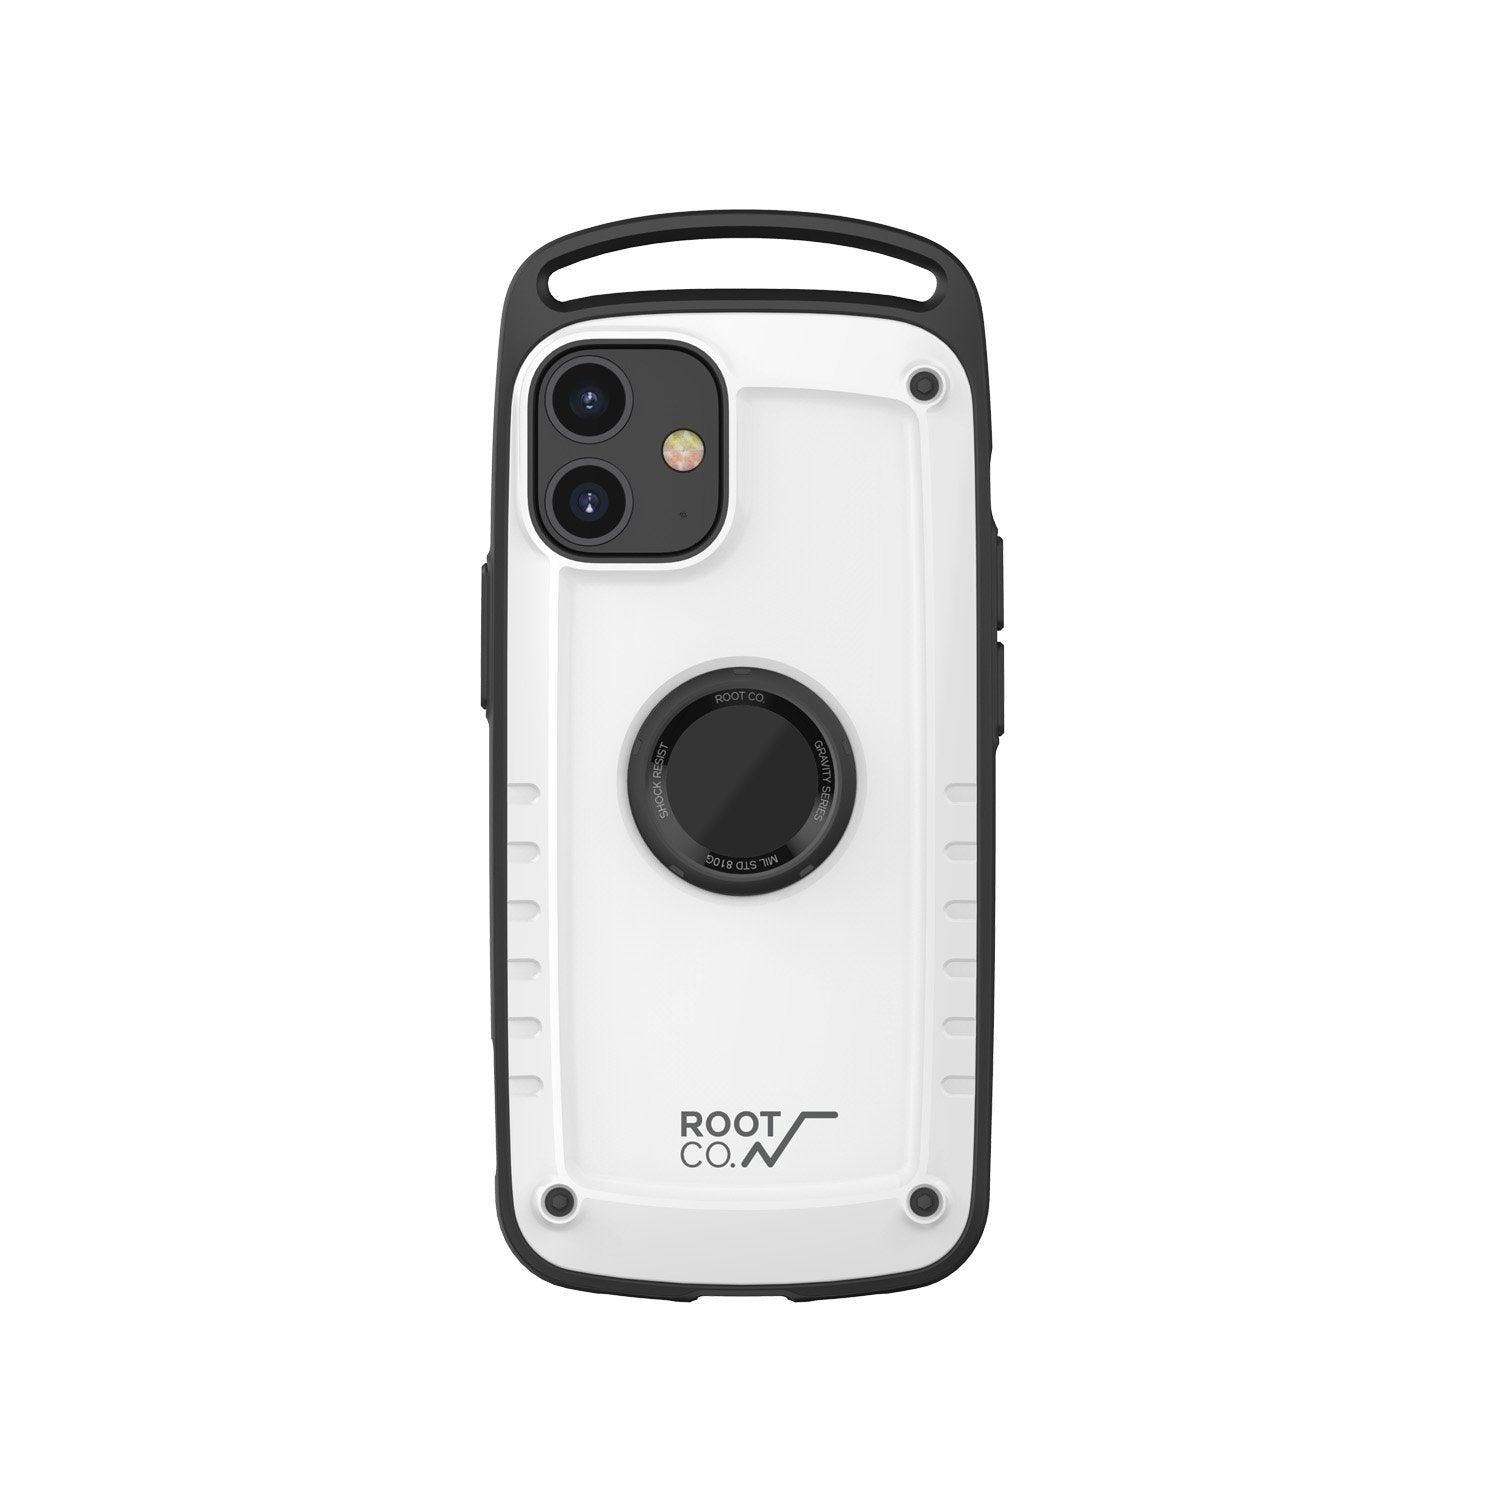 ROOT CO. Gravity Shock Resist Case Pro for iPhone 12 mini 5.4"(2020), Matte White Default ROOT CO. 